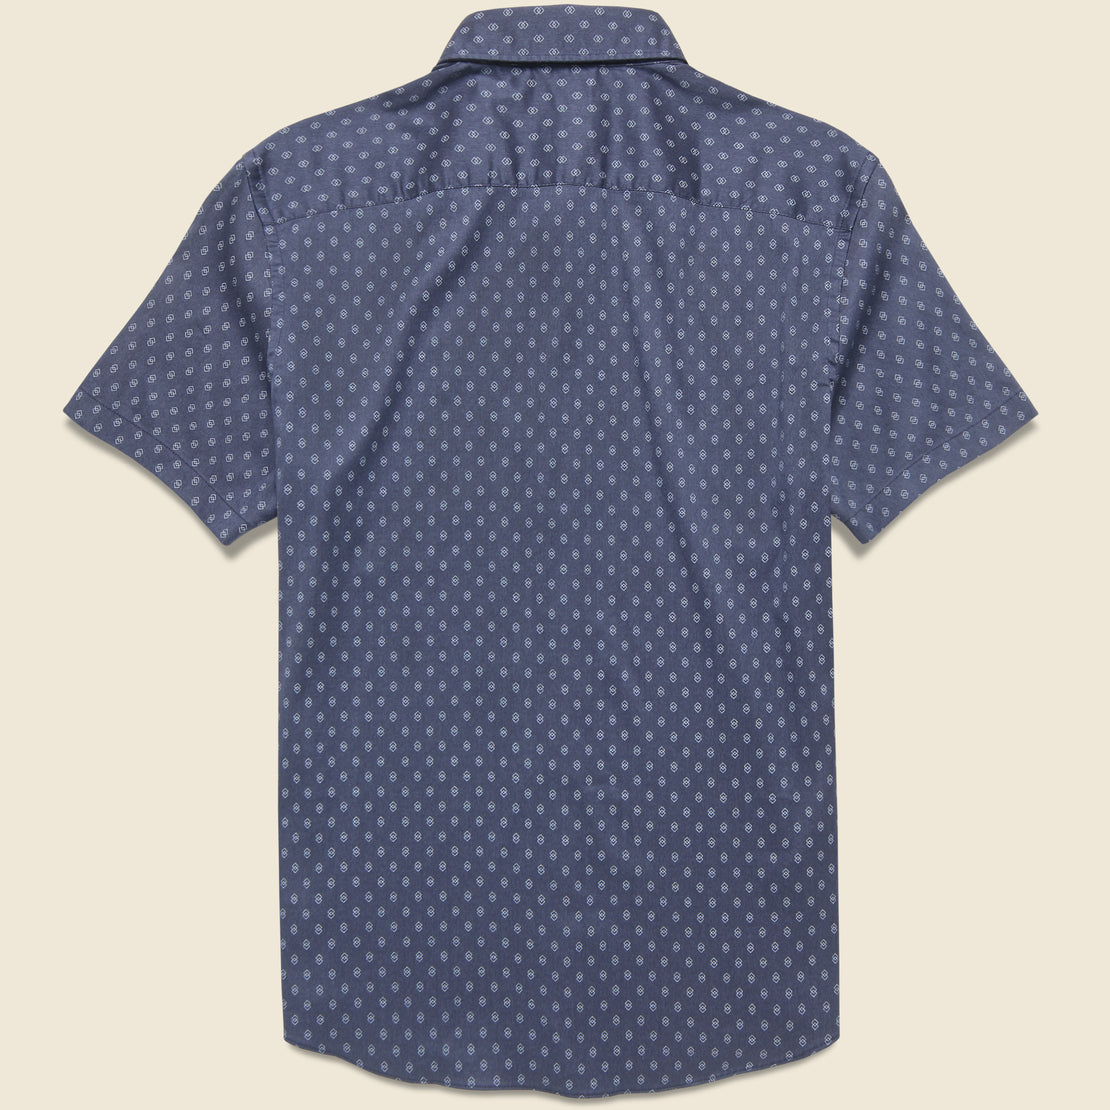 Movement Shirt - Navy Dusk Diamond Print - Faherty - STAG Provisions - Tops - S/S Woven - Other Pattern